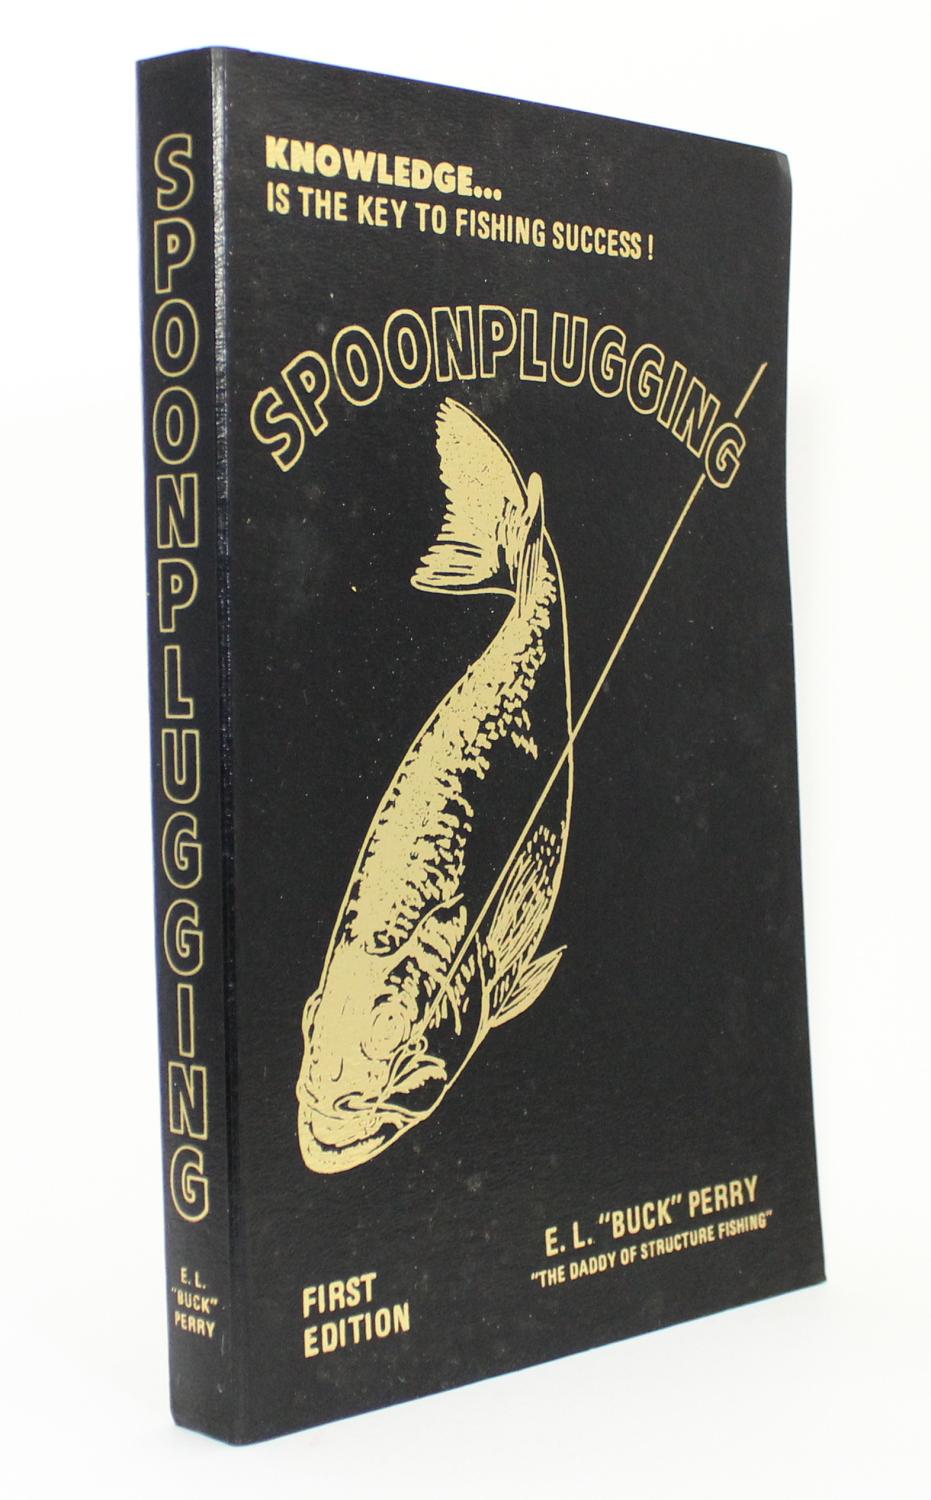 Spoonplugging: Your Guide to Lunker Catches von Elwood L. Buck